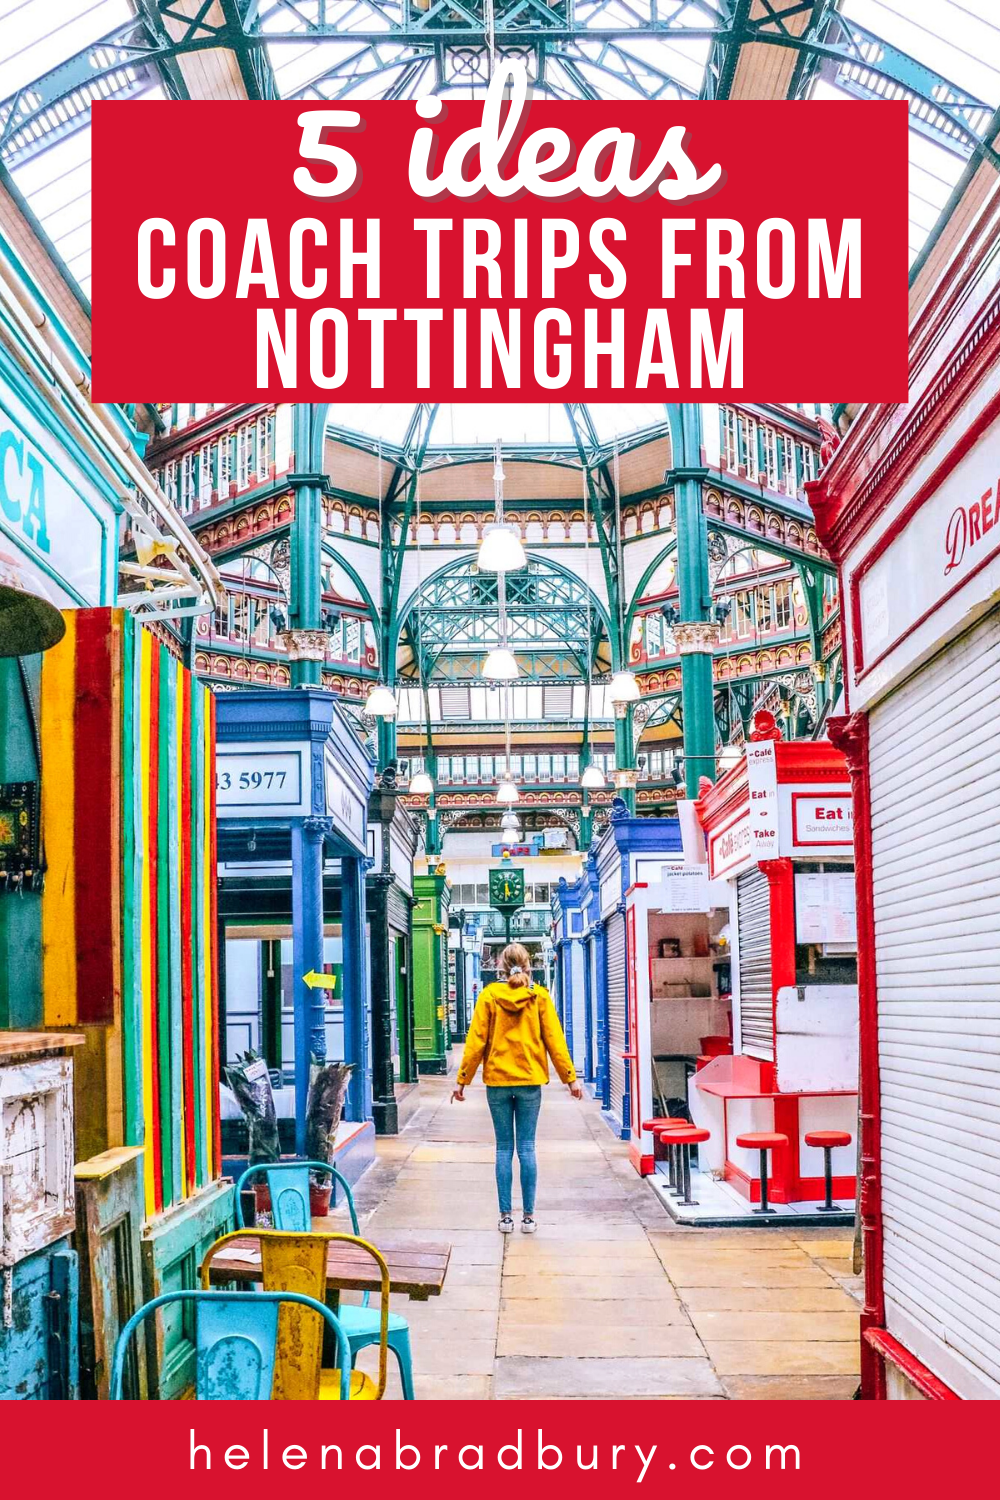 Here are a few ideas for coach trips from Nottingham with National Express  | national express coach travel | coach travel buses | coach travel tips | travel uk on a budget | budget travel uk | national express coach buses | travel on a budget | day…